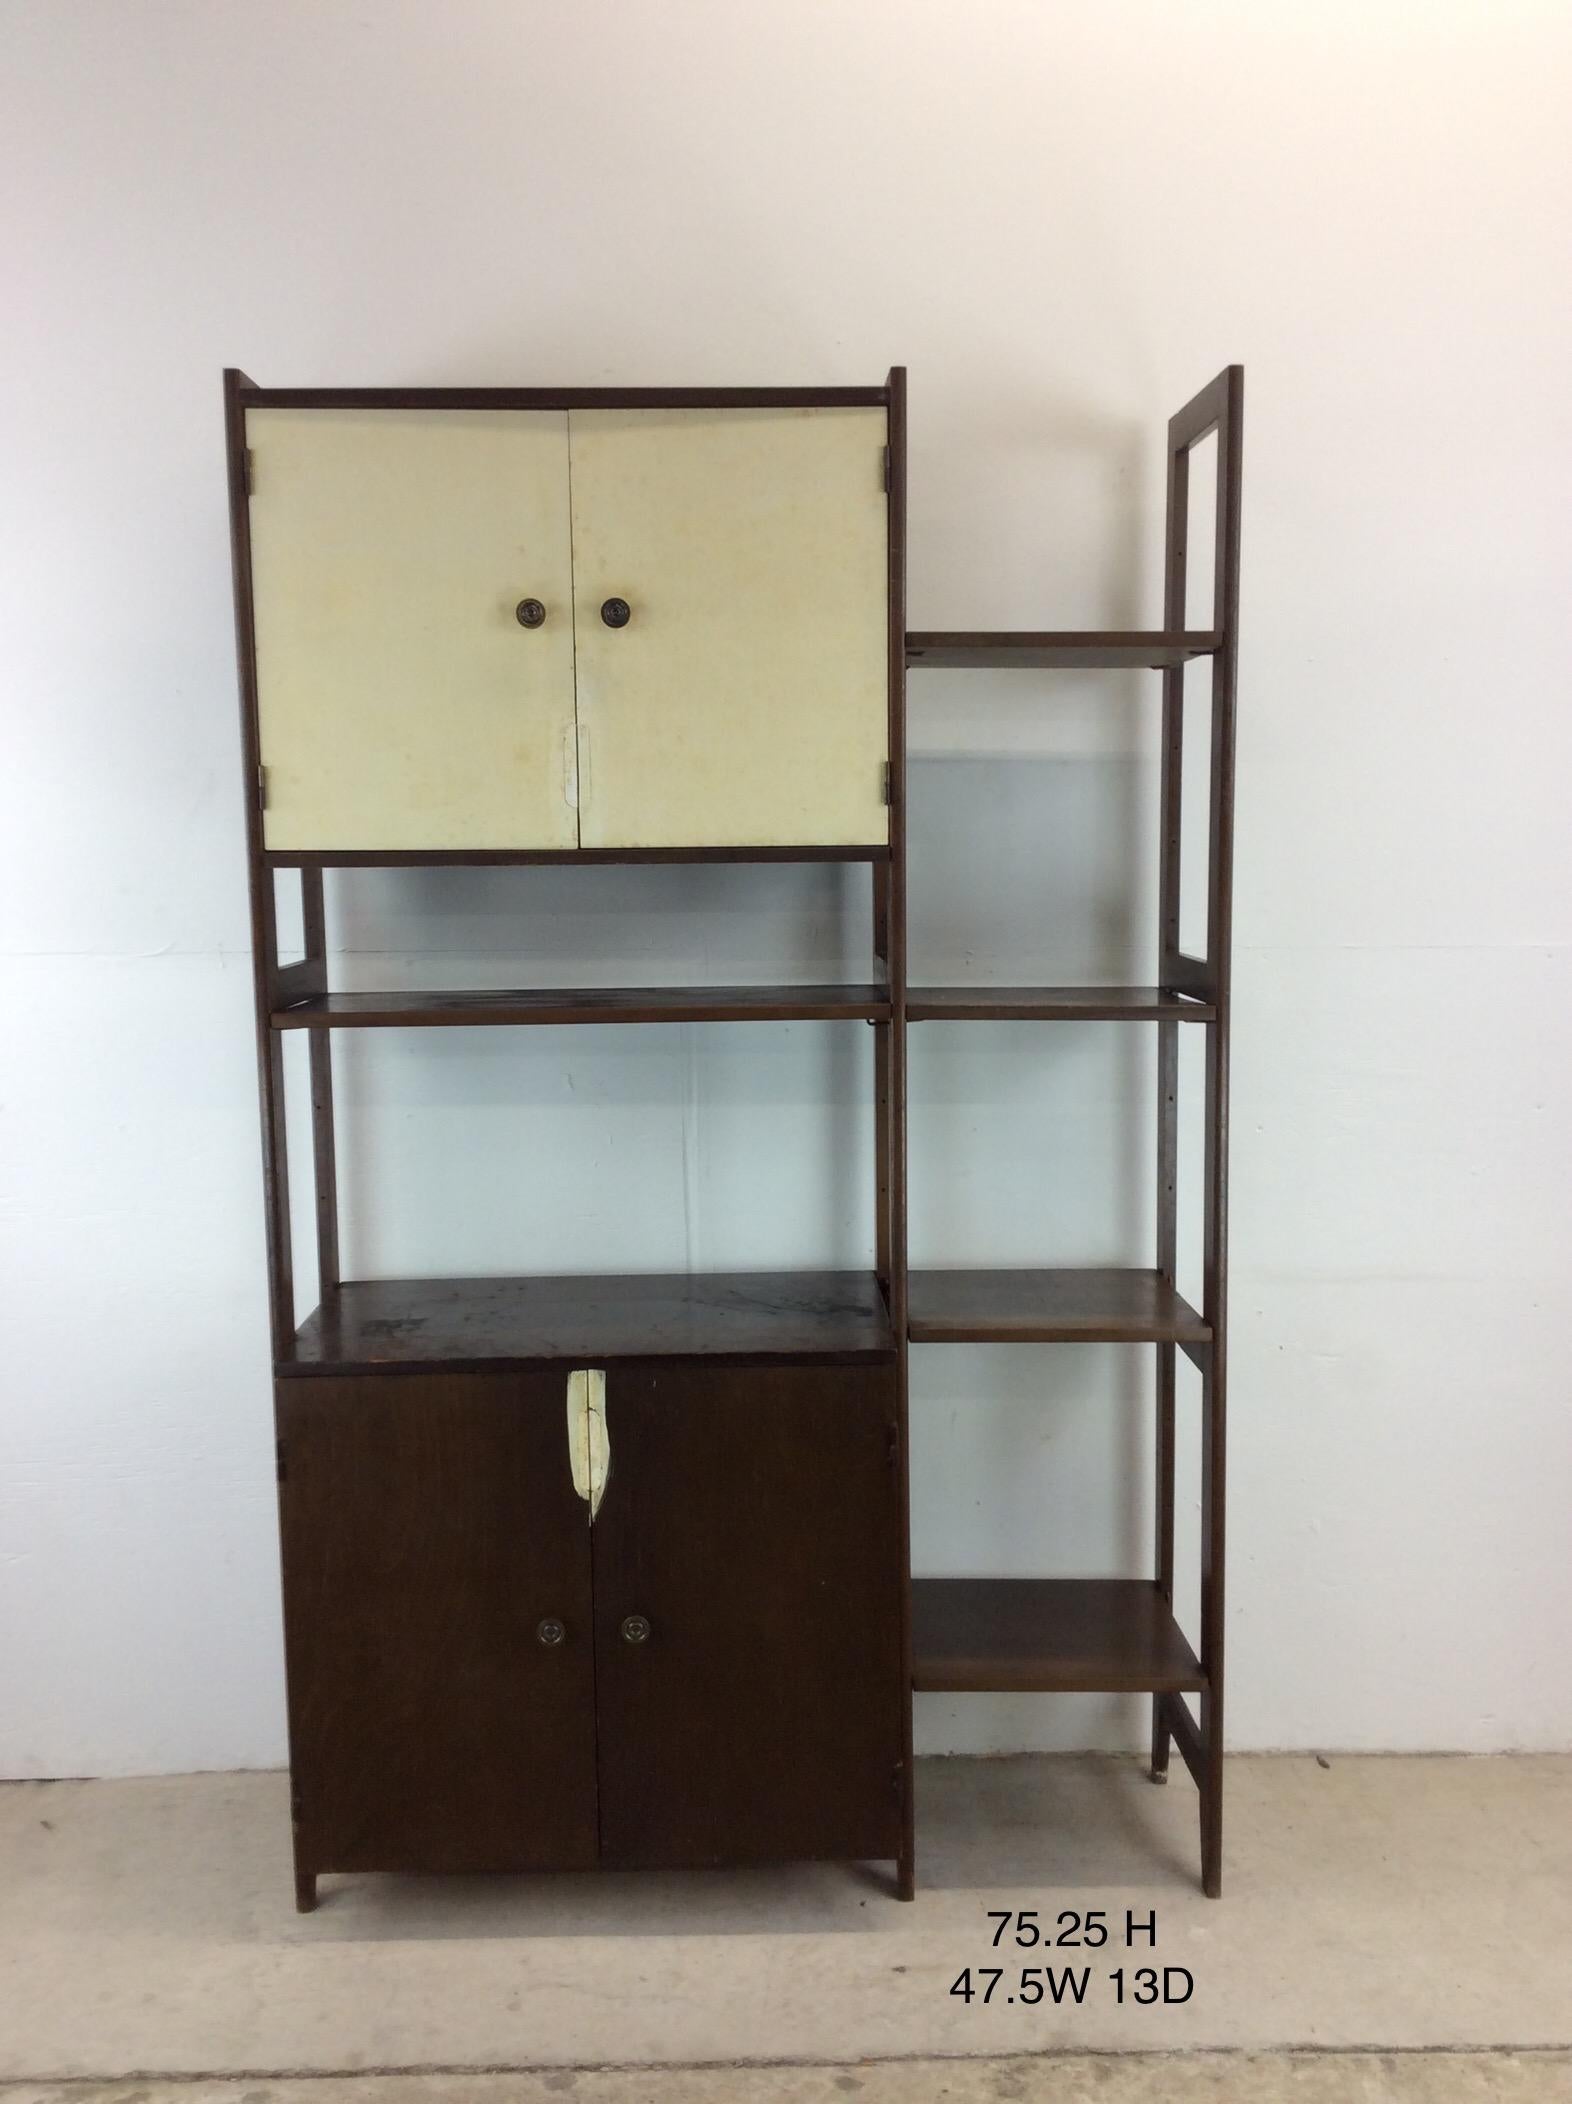 This mid century modern two piece modular shelving unit features hardwood construction, free standing two piece design, full interchangeable cabinet & shelving locations, finished back, and tapered legs.

Dimensions: 106.5w 13d 75.25h 

Condition: